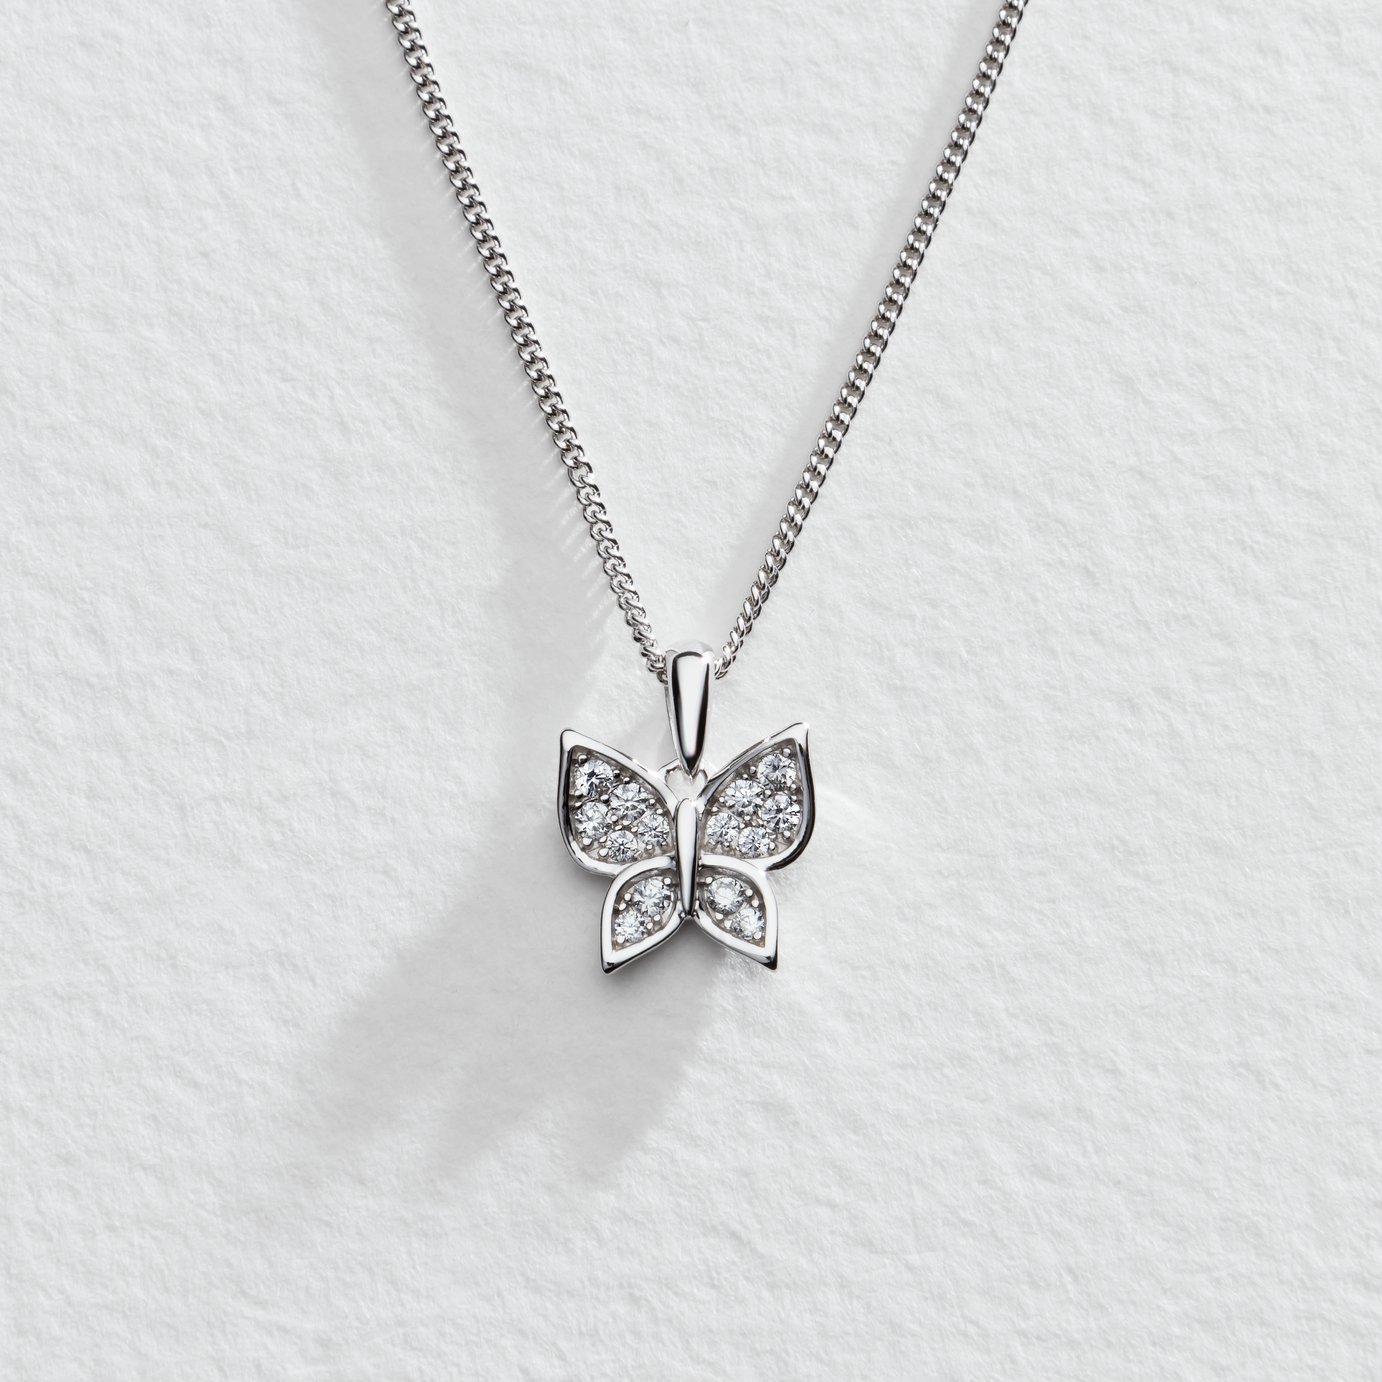 Sterling Silver & 9ct Rose Gold Floating Diamond Butterfly Pendant Necklace